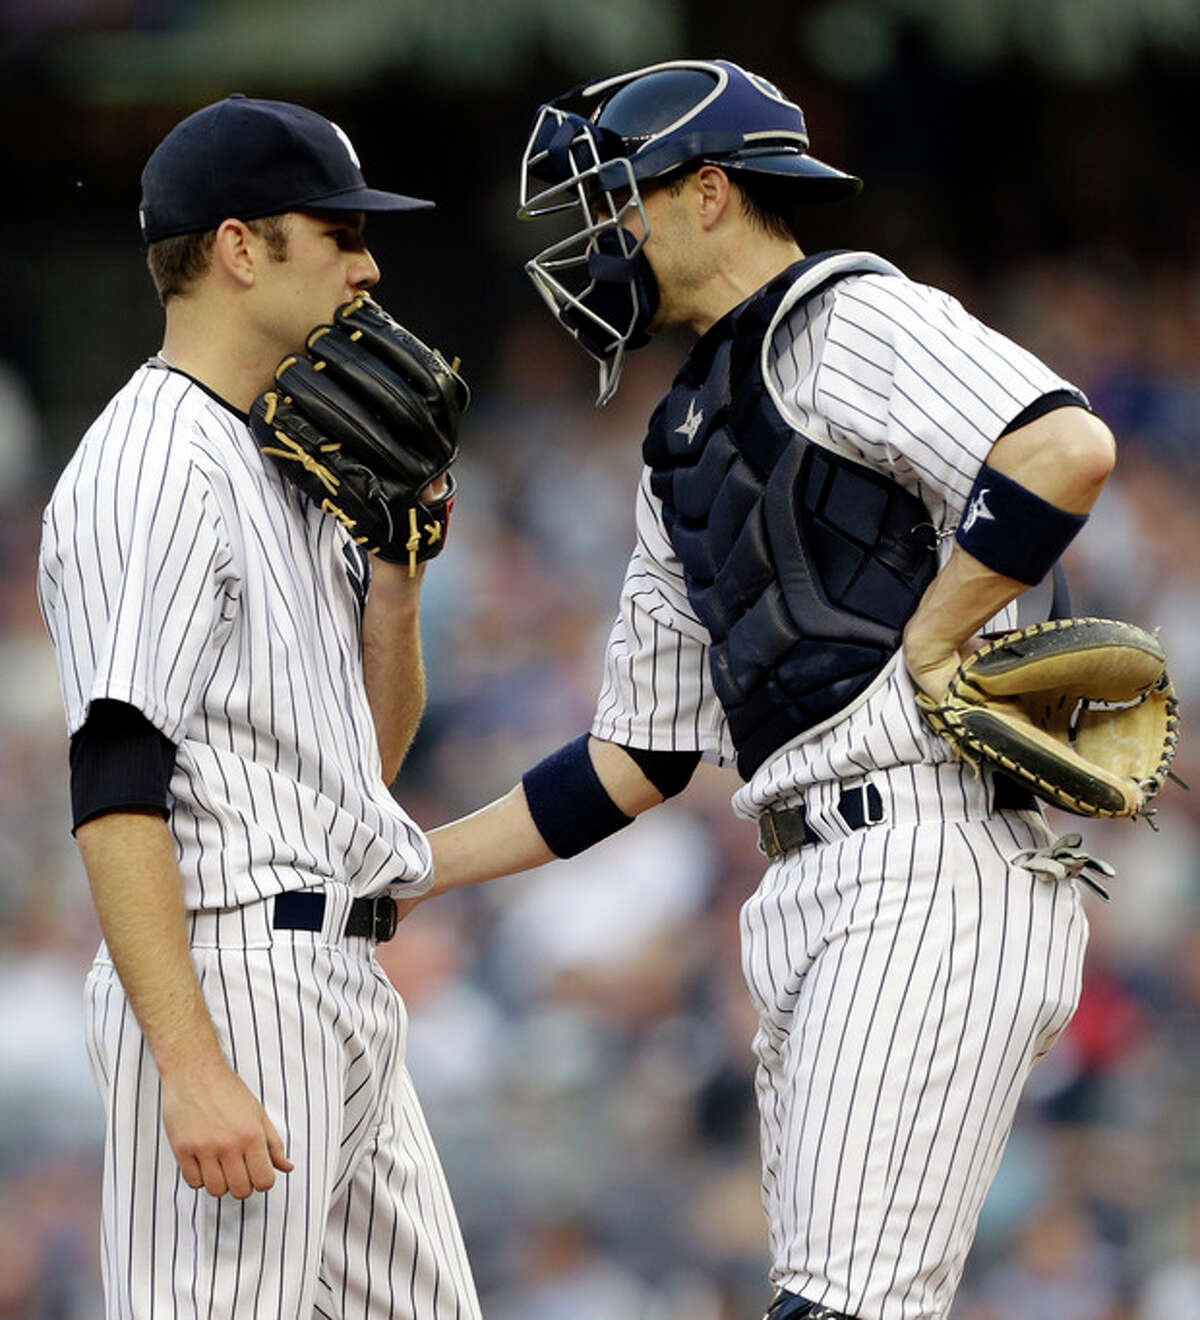 New York Yankees catcher Chris Stewart, right, talks with starting pitcher David Phelps in the first inning of in an interleague baseball game against the New York Mets at Yankee Stadium in New York, Wednesday, May 29, 2013. Phelps allowed five runs and registered one out before manager Joe Girardi relieved him from the game. (AP Photo/Kathy Willens)